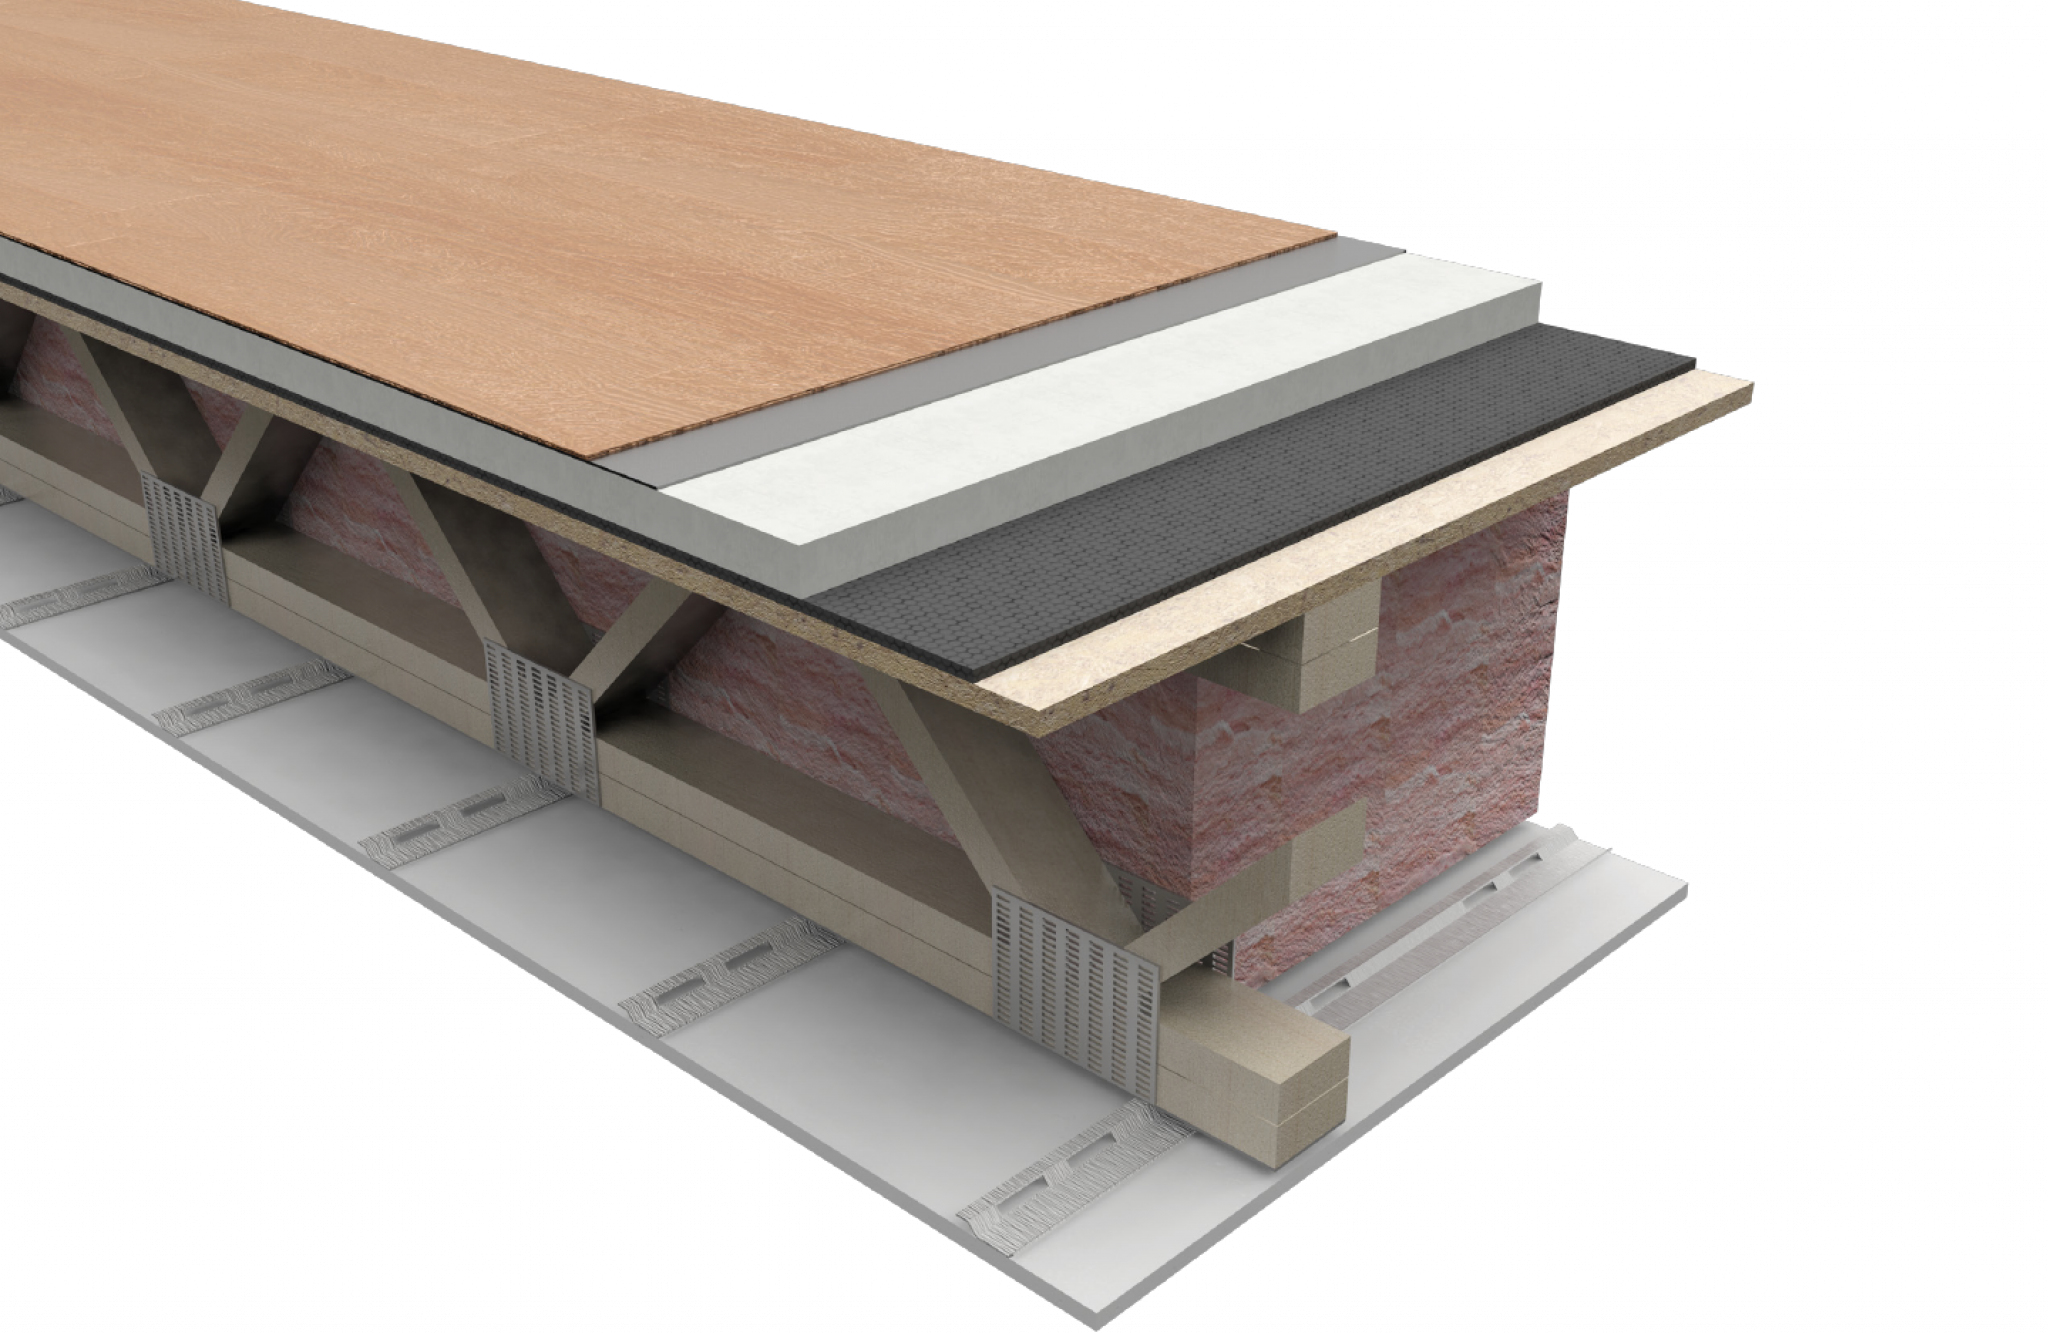 graphic showing extra wall and floor insulation used in construction